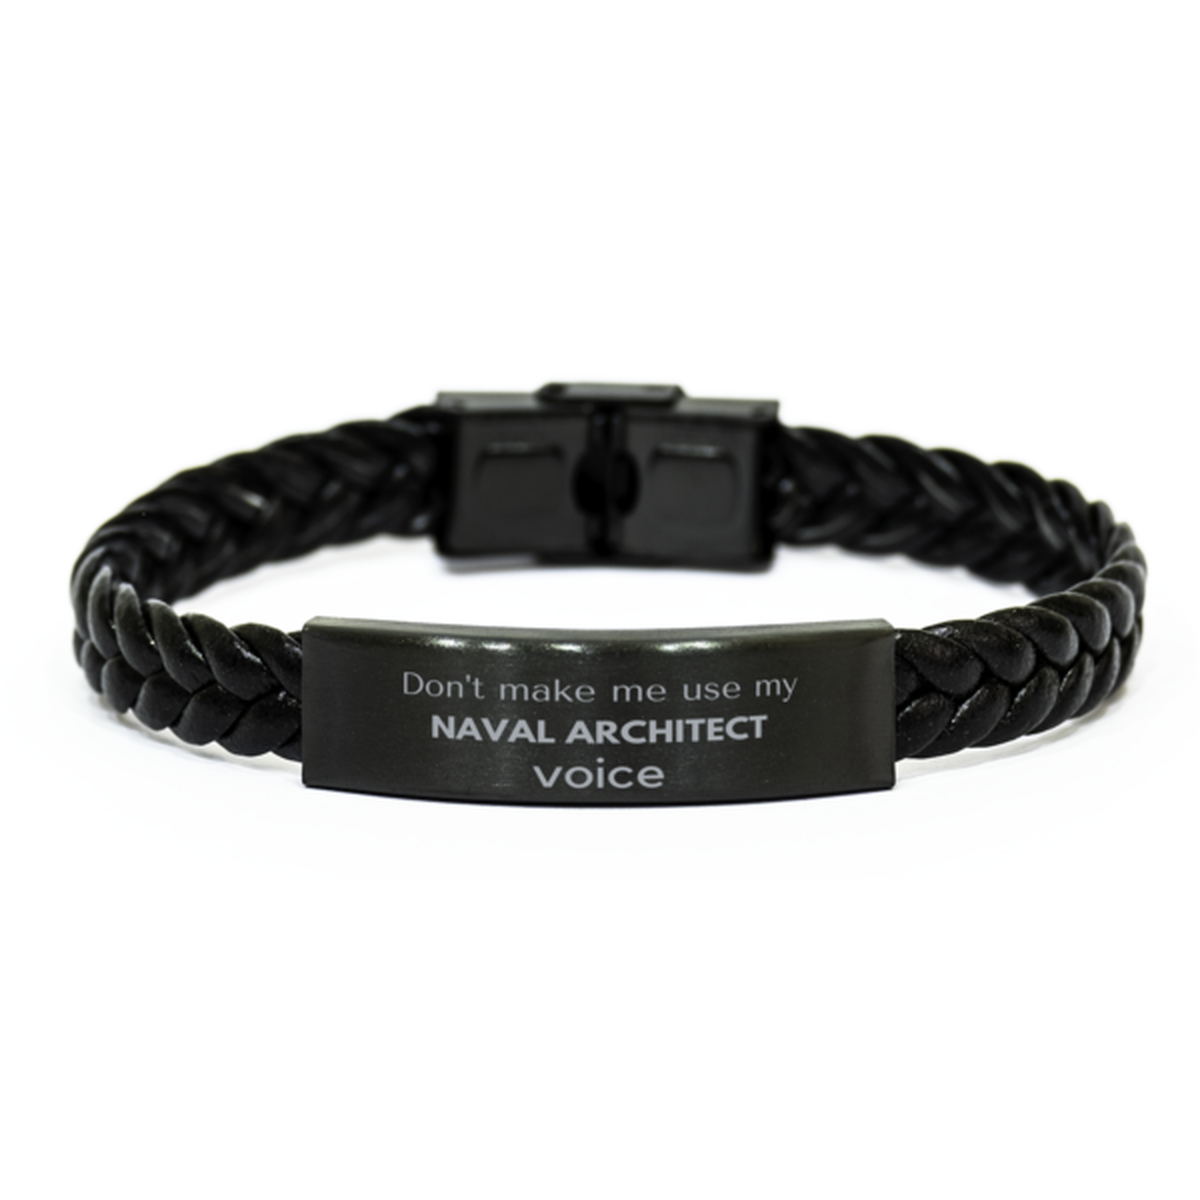 Don't make me use my Naval Architect voice, Sarcasm Naval Architect Gifts, Christmas Naval Architect Braided Leather Bracelet Birthday Unique Gifts For Naval Architect Coworkers, Men, Women, Colleague, Friends